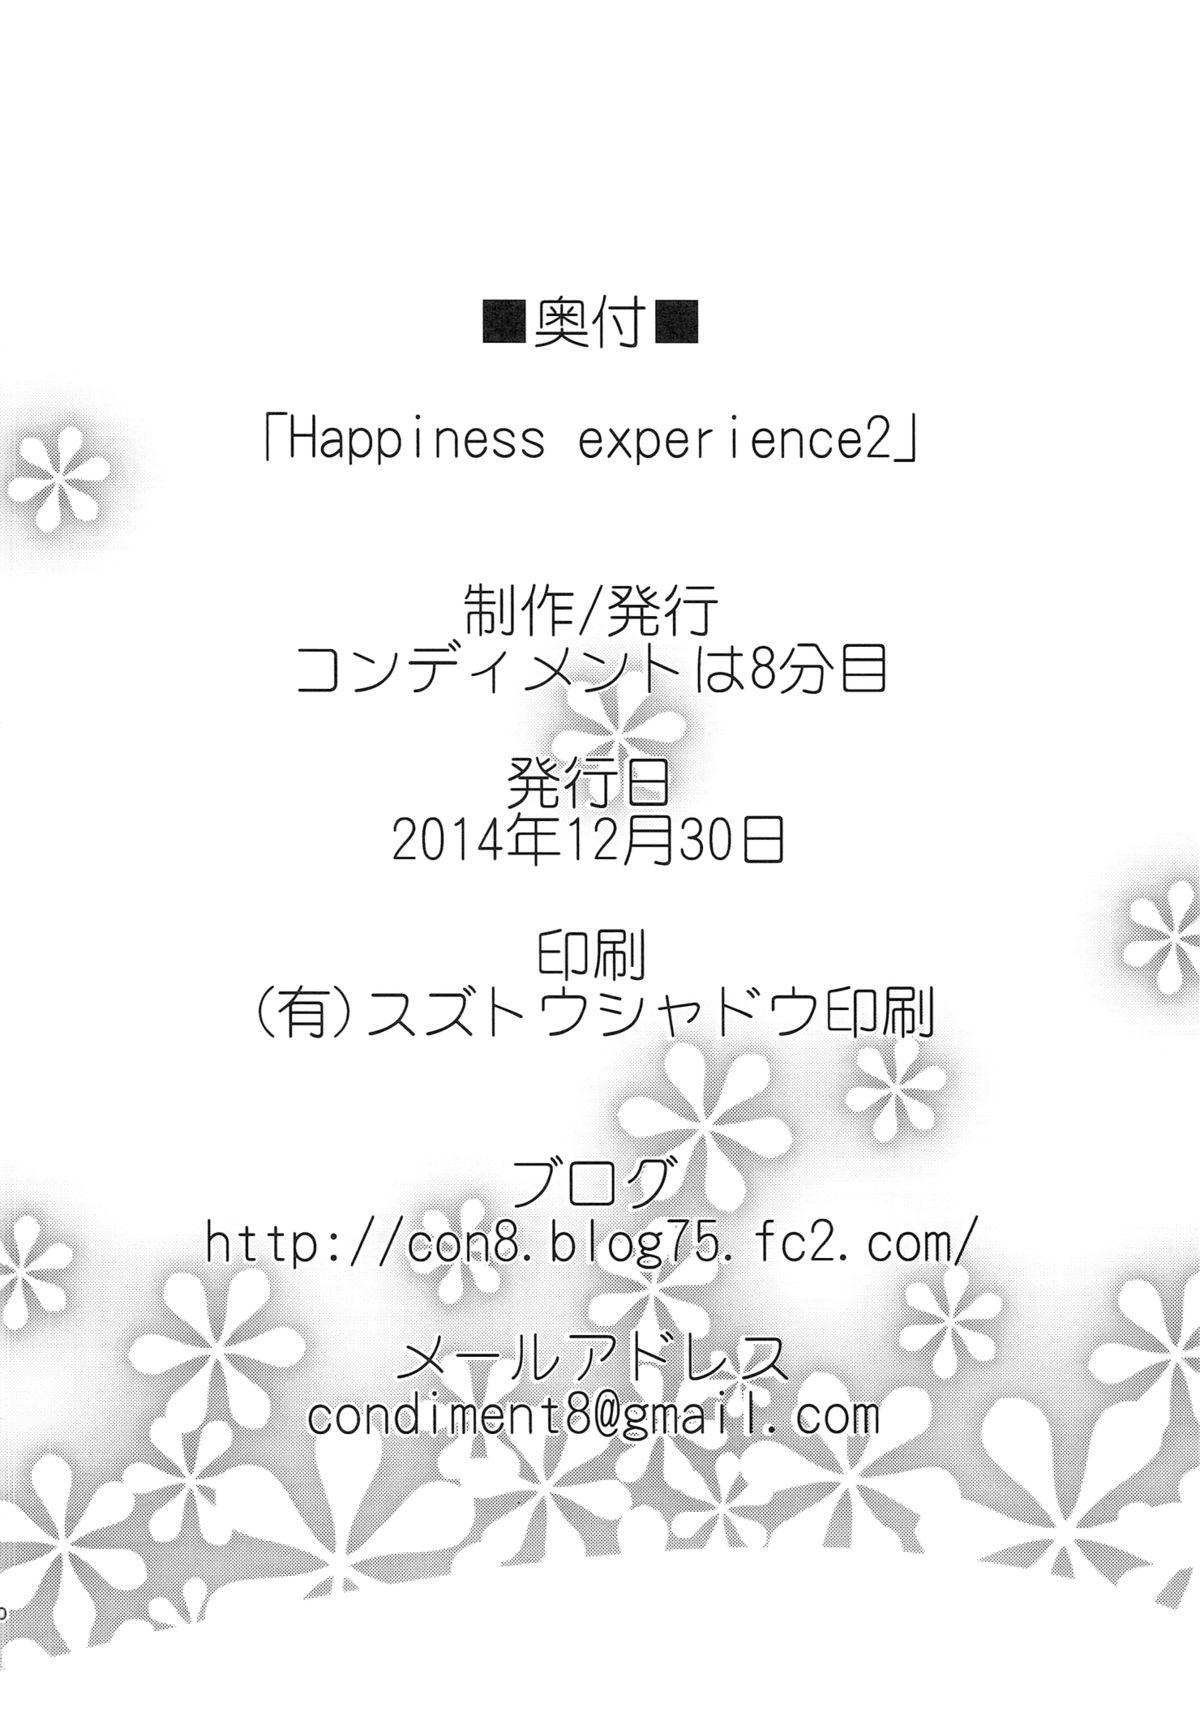 Happiness experience 2 28